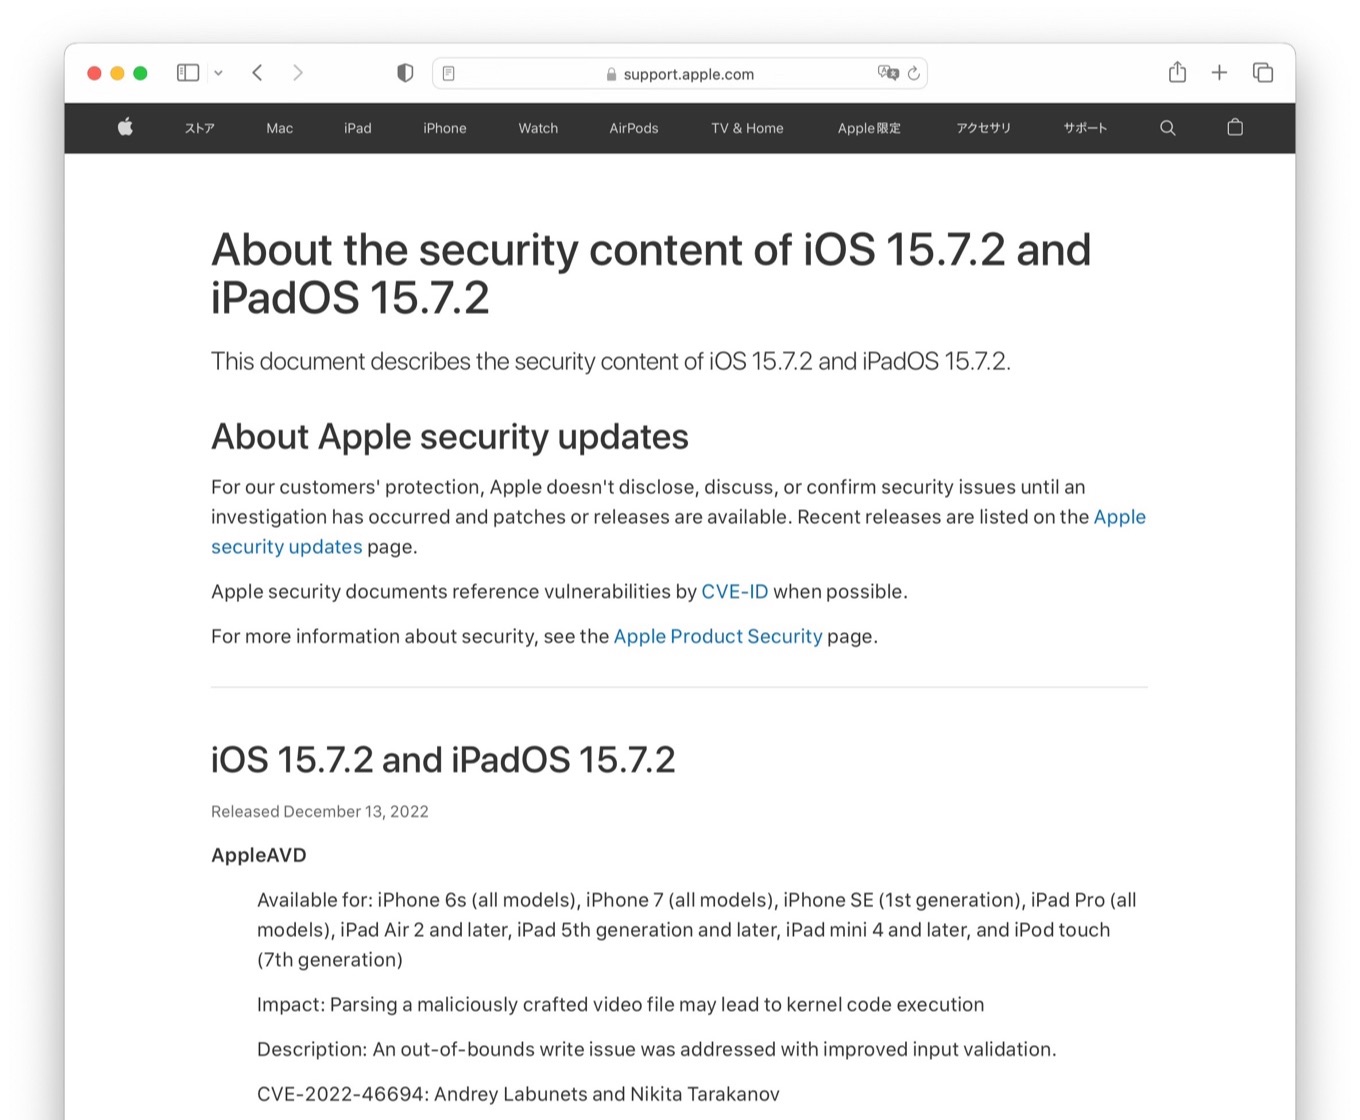 About the security content of iOS 15.7.2 and iPadOS 15.7.2